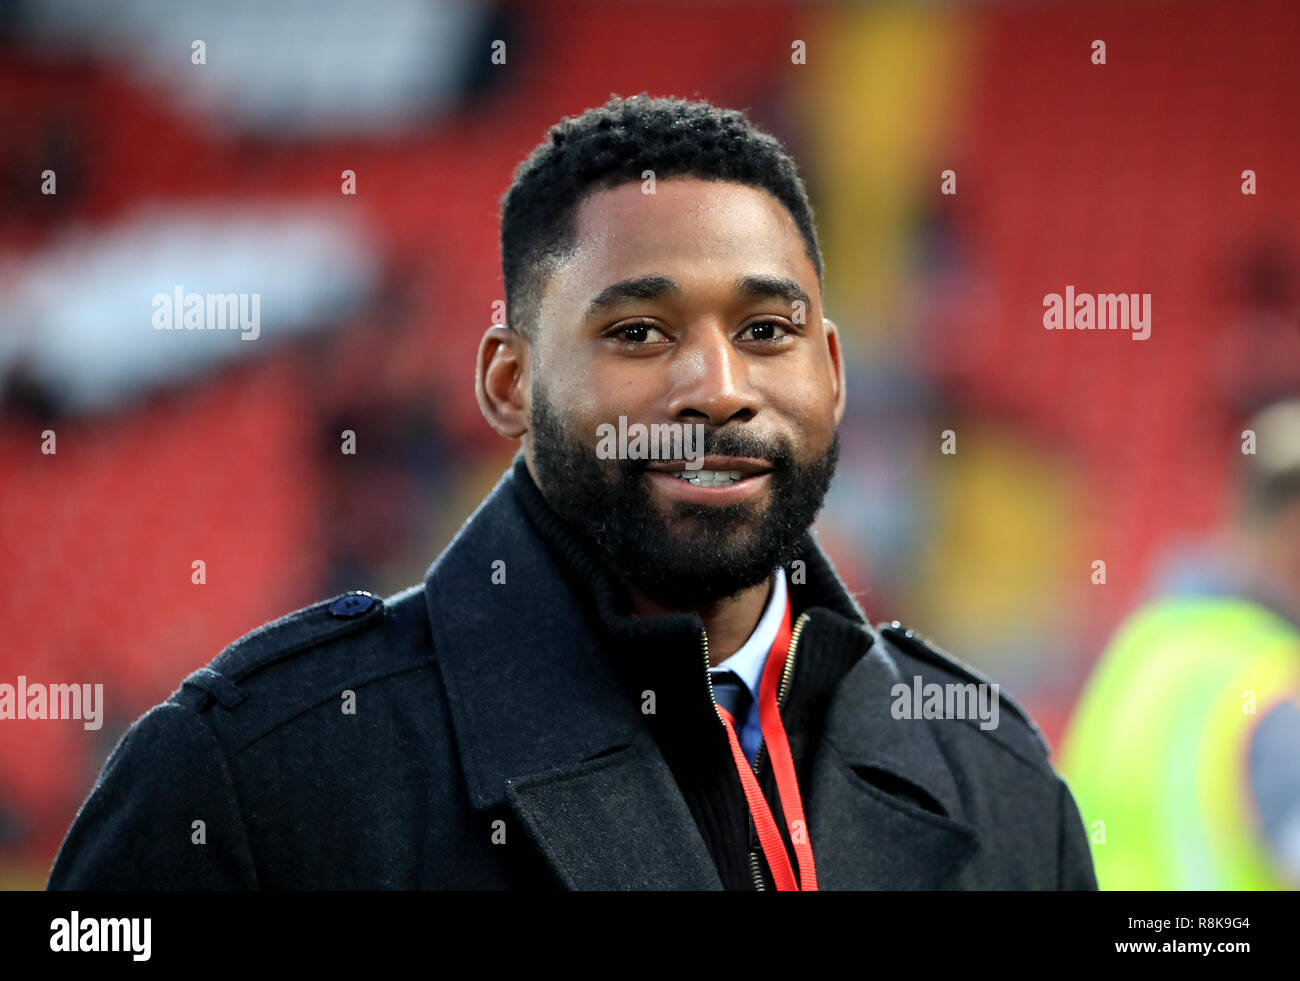 Boston Red Sox baseball player Jackie Bradley Jr ahead of the Premier League match at Anfield, Liverpool. Stock Photo